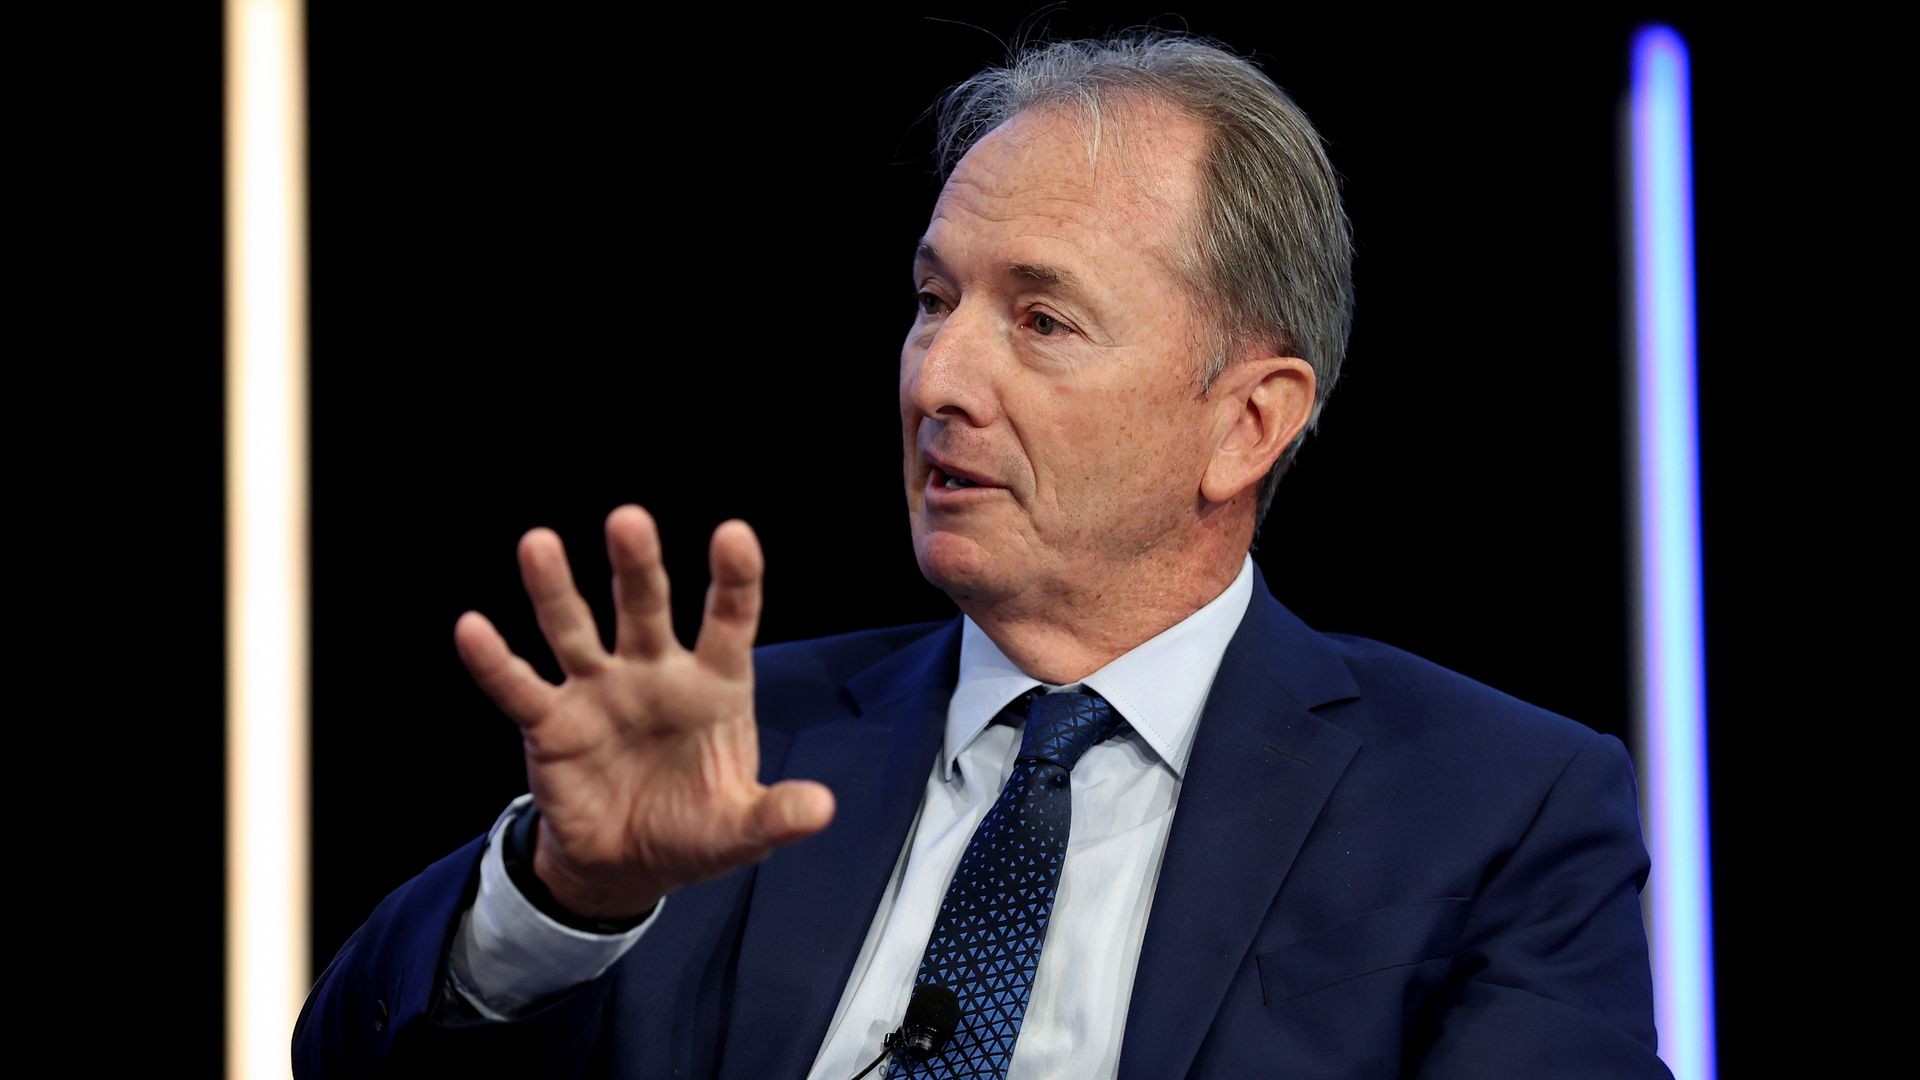 James Gorman, chairman and chief executive of Morgan Stanley, speaks during the AFR Business Summit in Sydney, Australia, on Tuesday, March 8, 2022. 